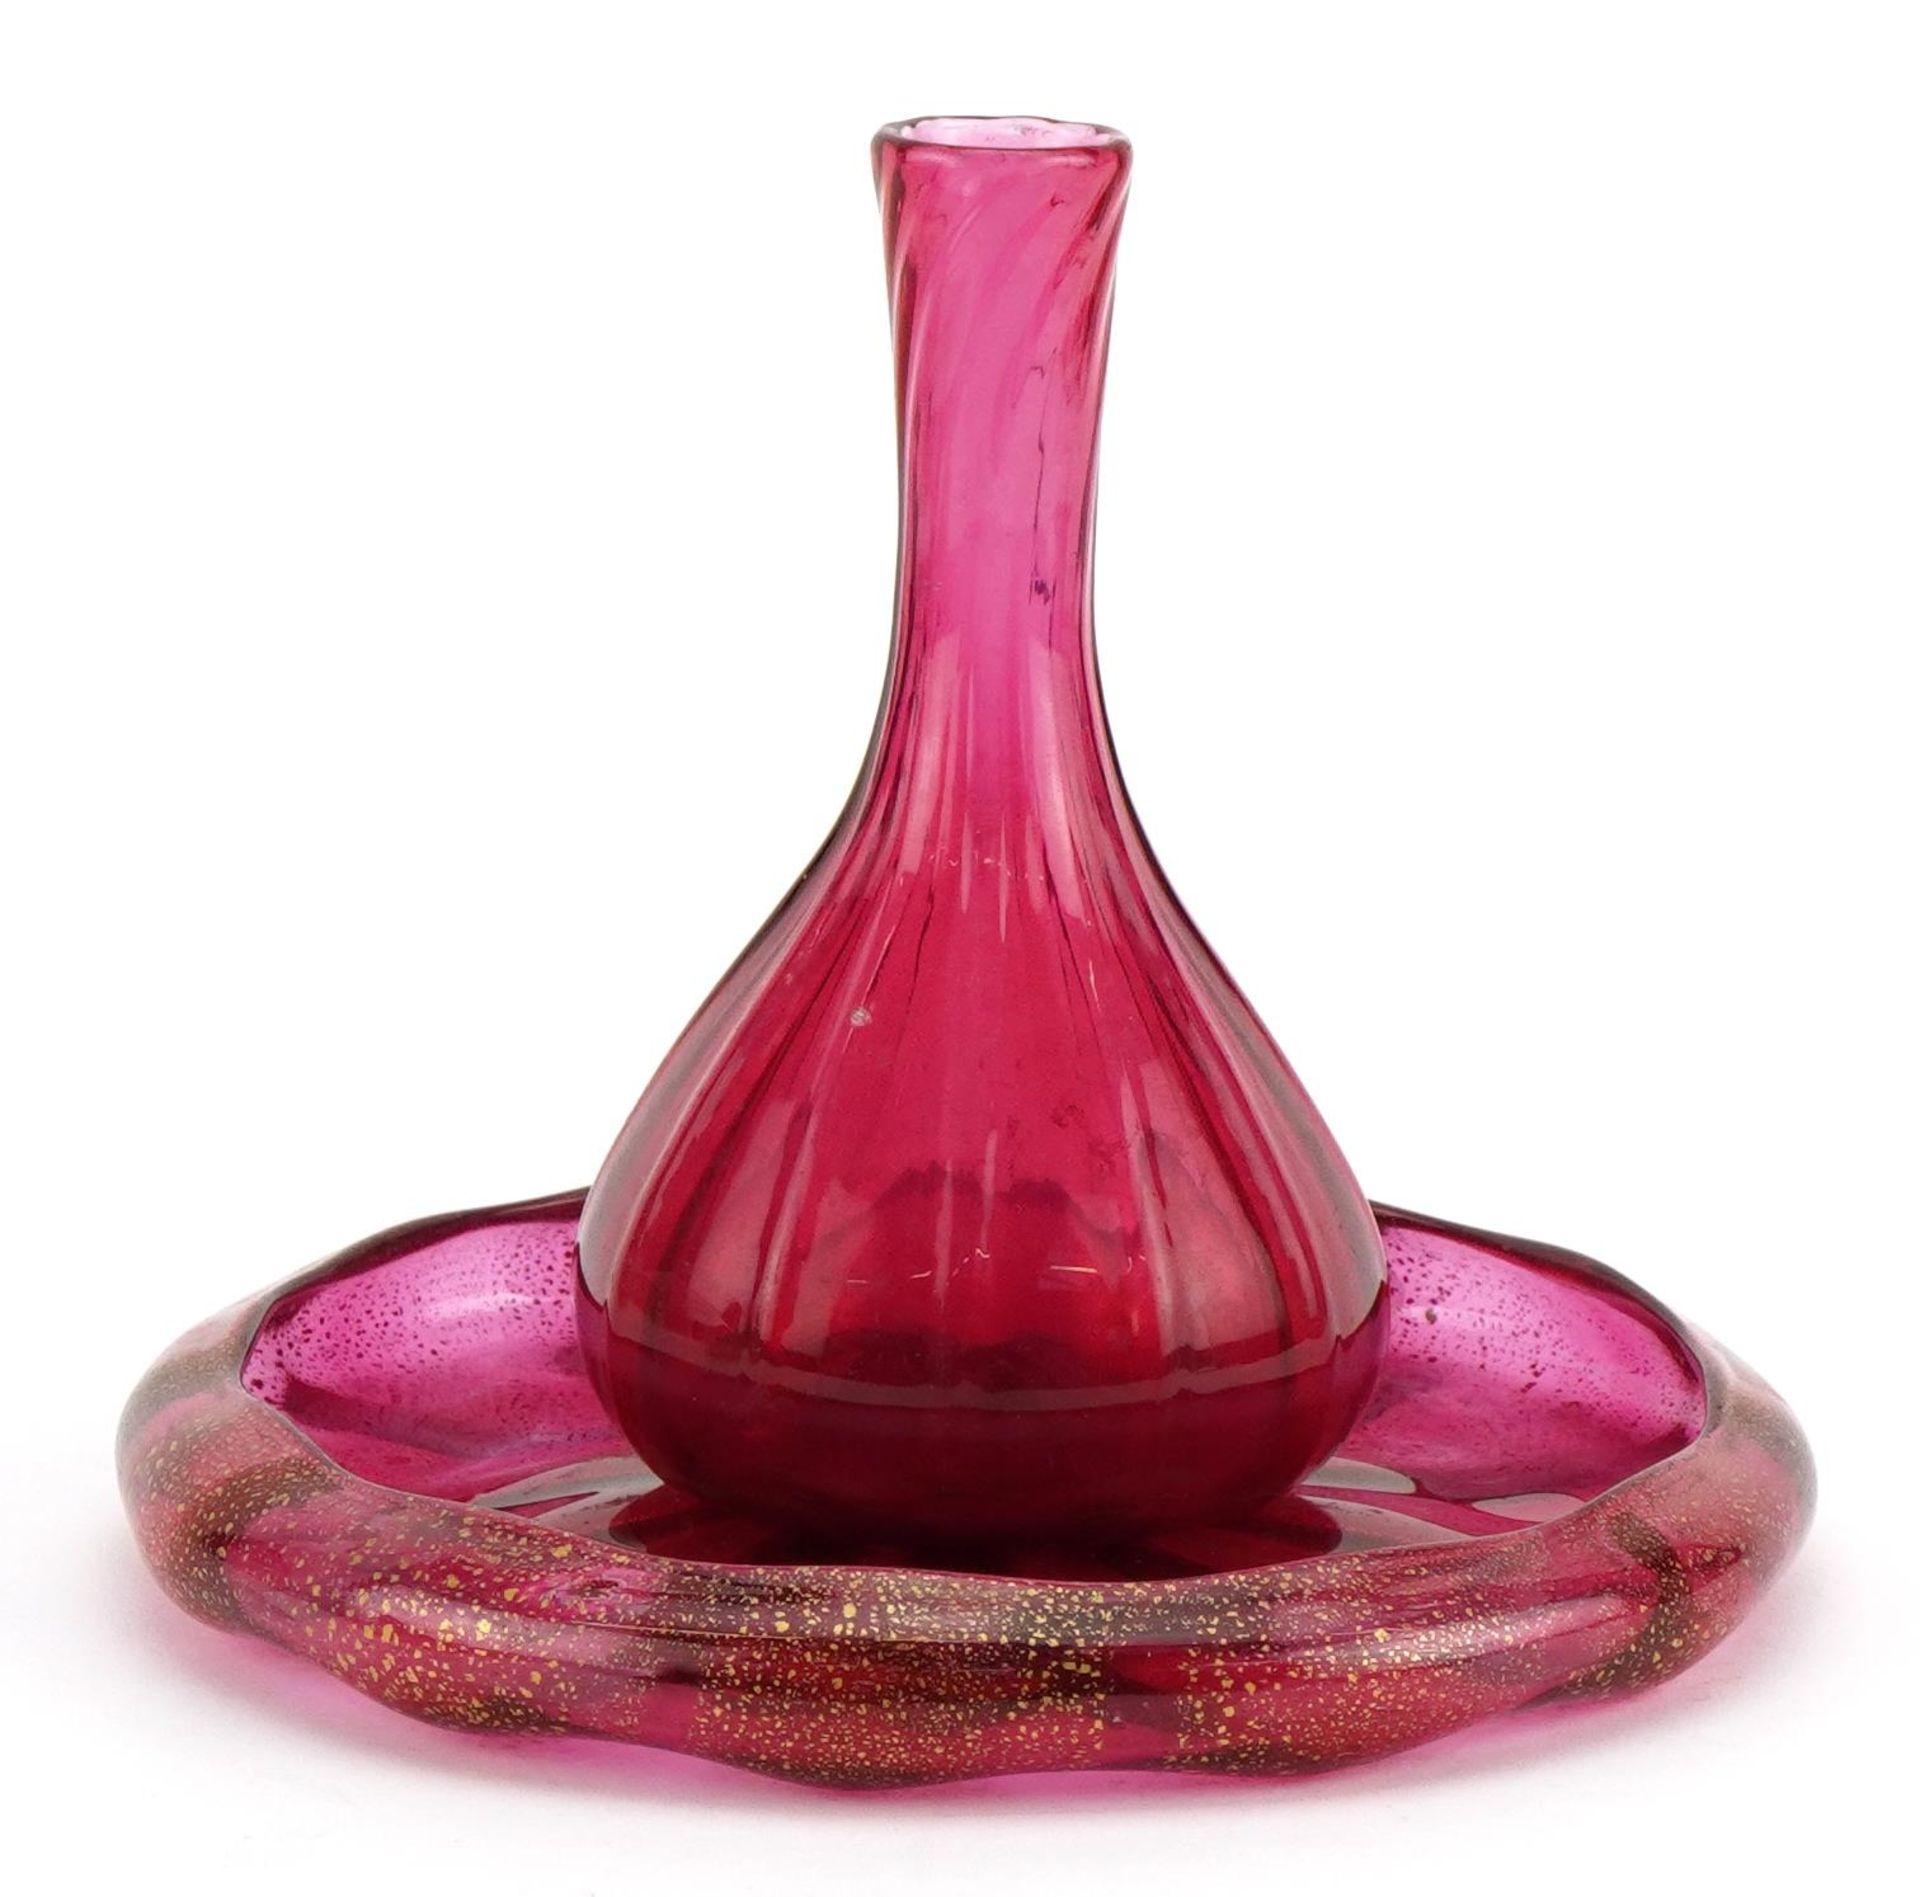 Murano gold flecked cranberry glass dish and a vase, the largest 15.5cm in diameter - Image 3 of 4